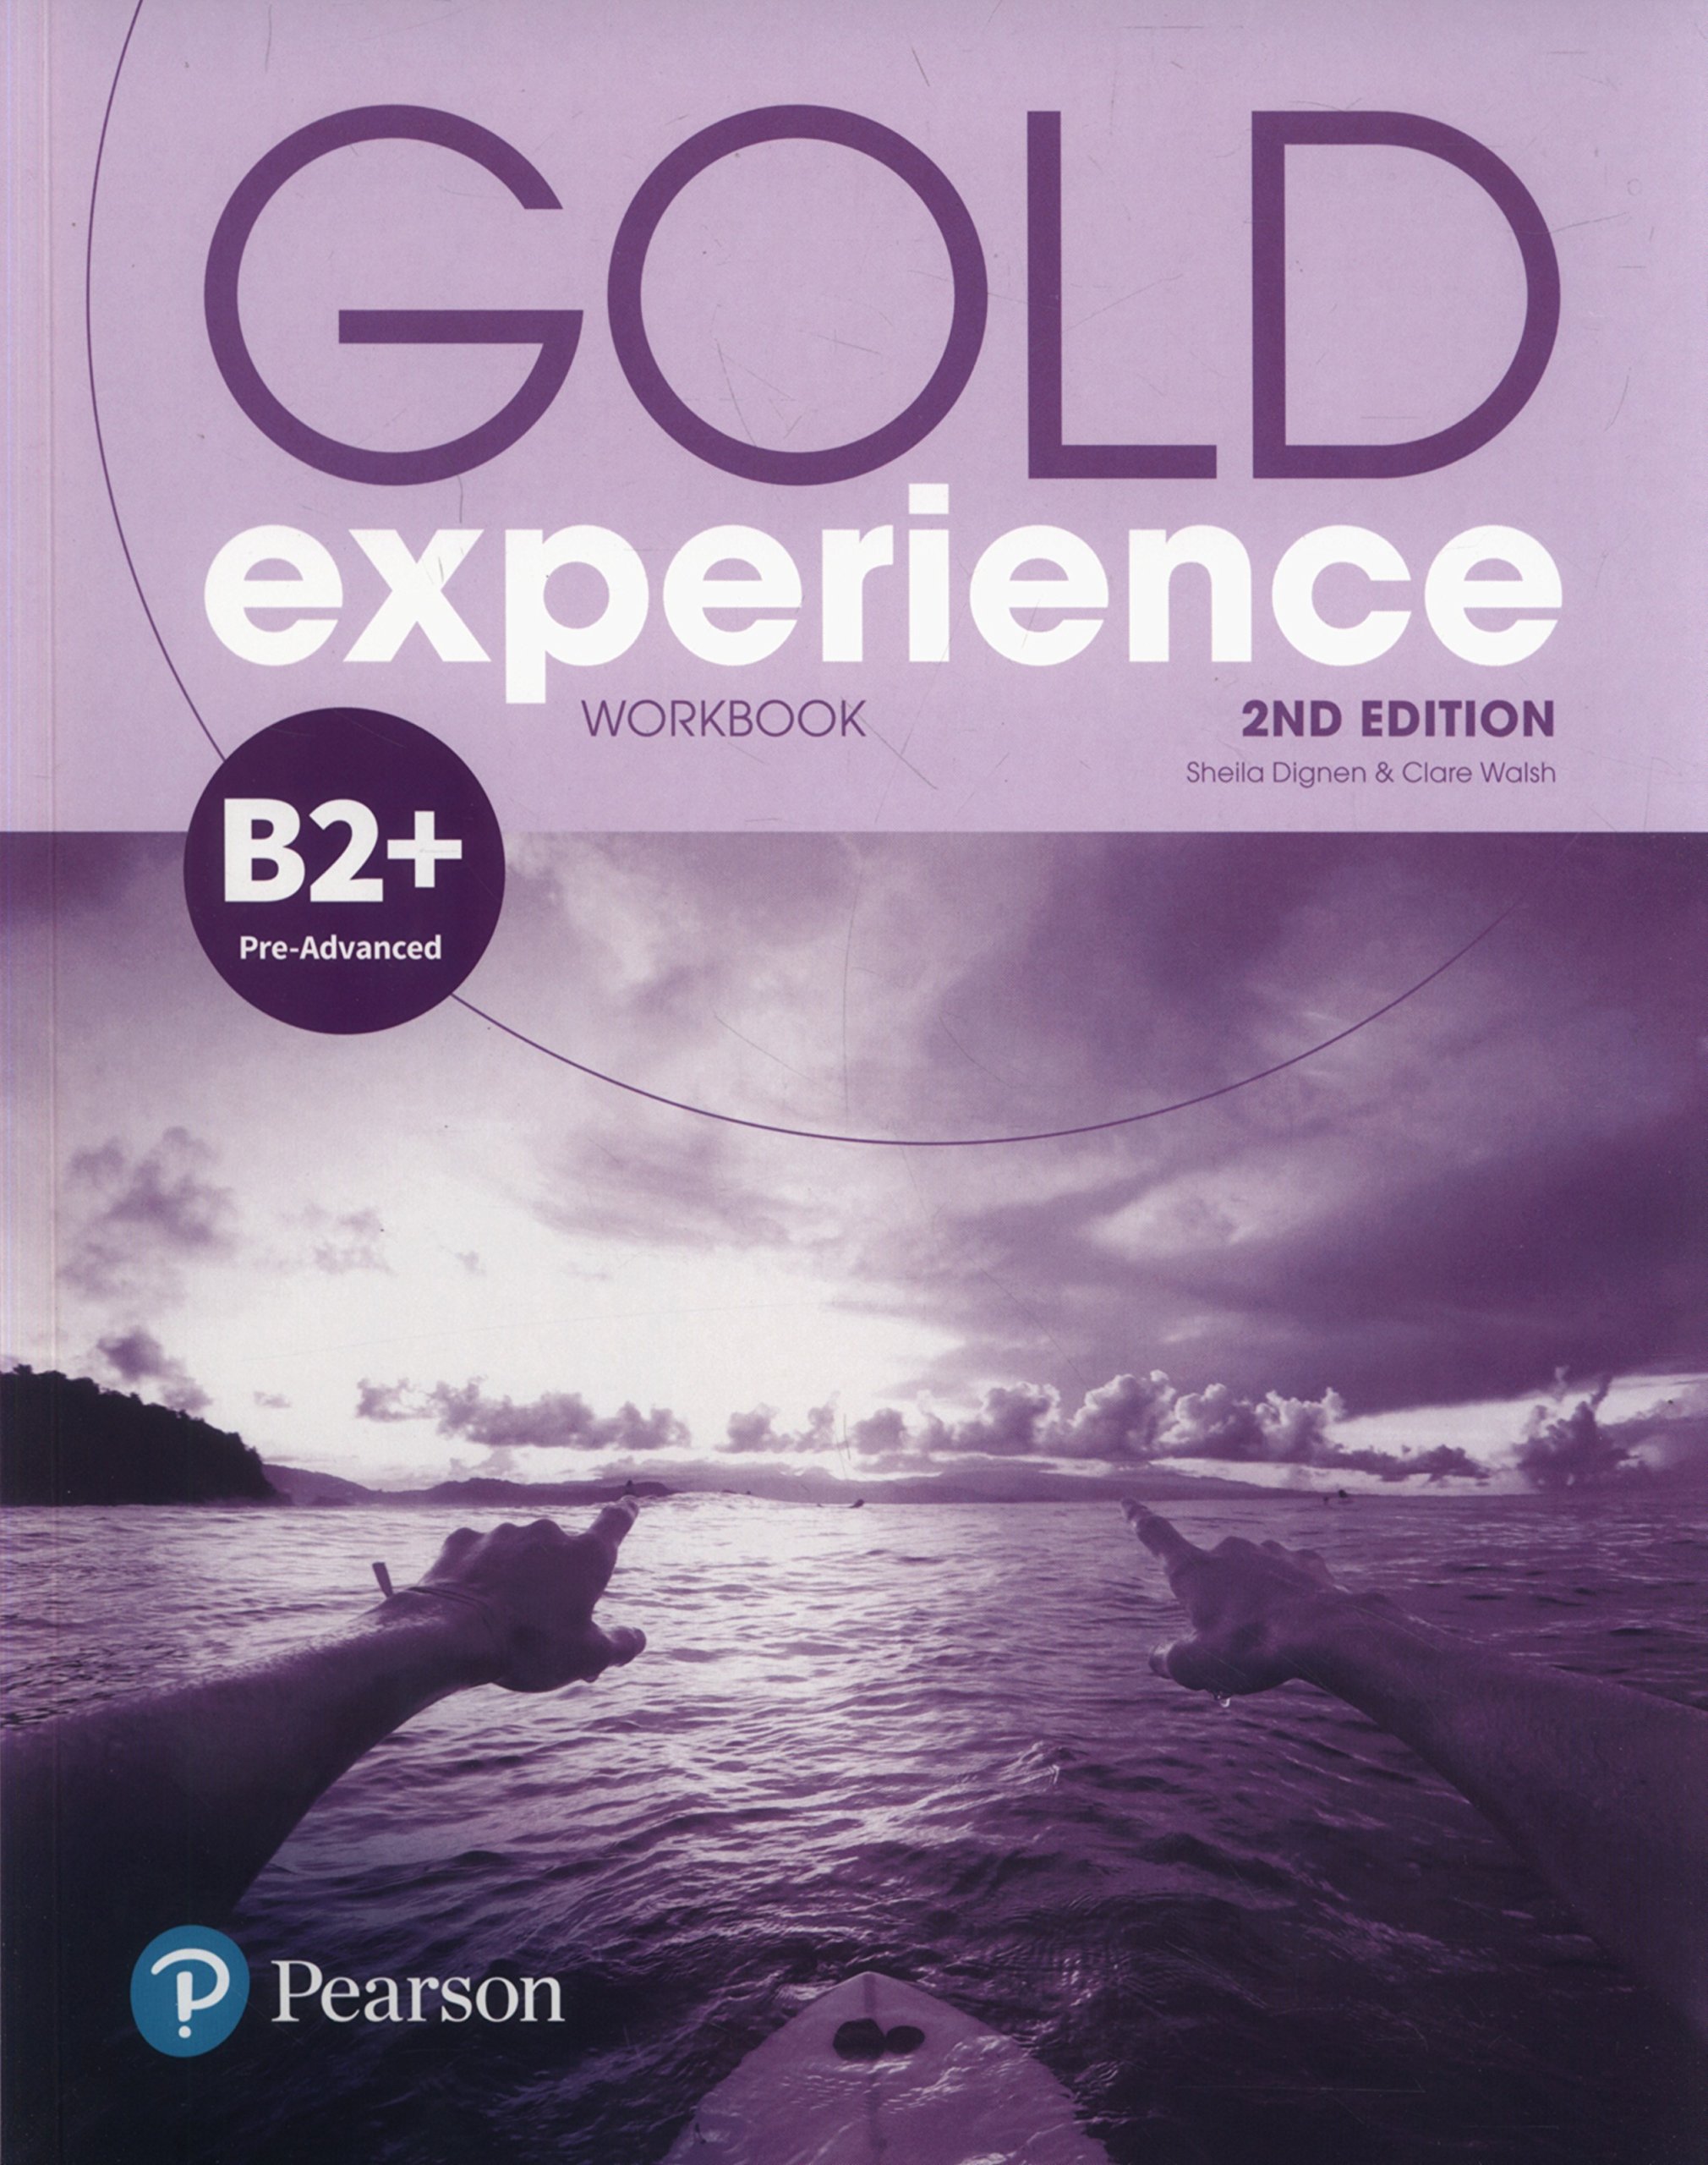 Gold Experience 2nd Edition B2+ Workbook | Clare Walsh, Sheila Dignen